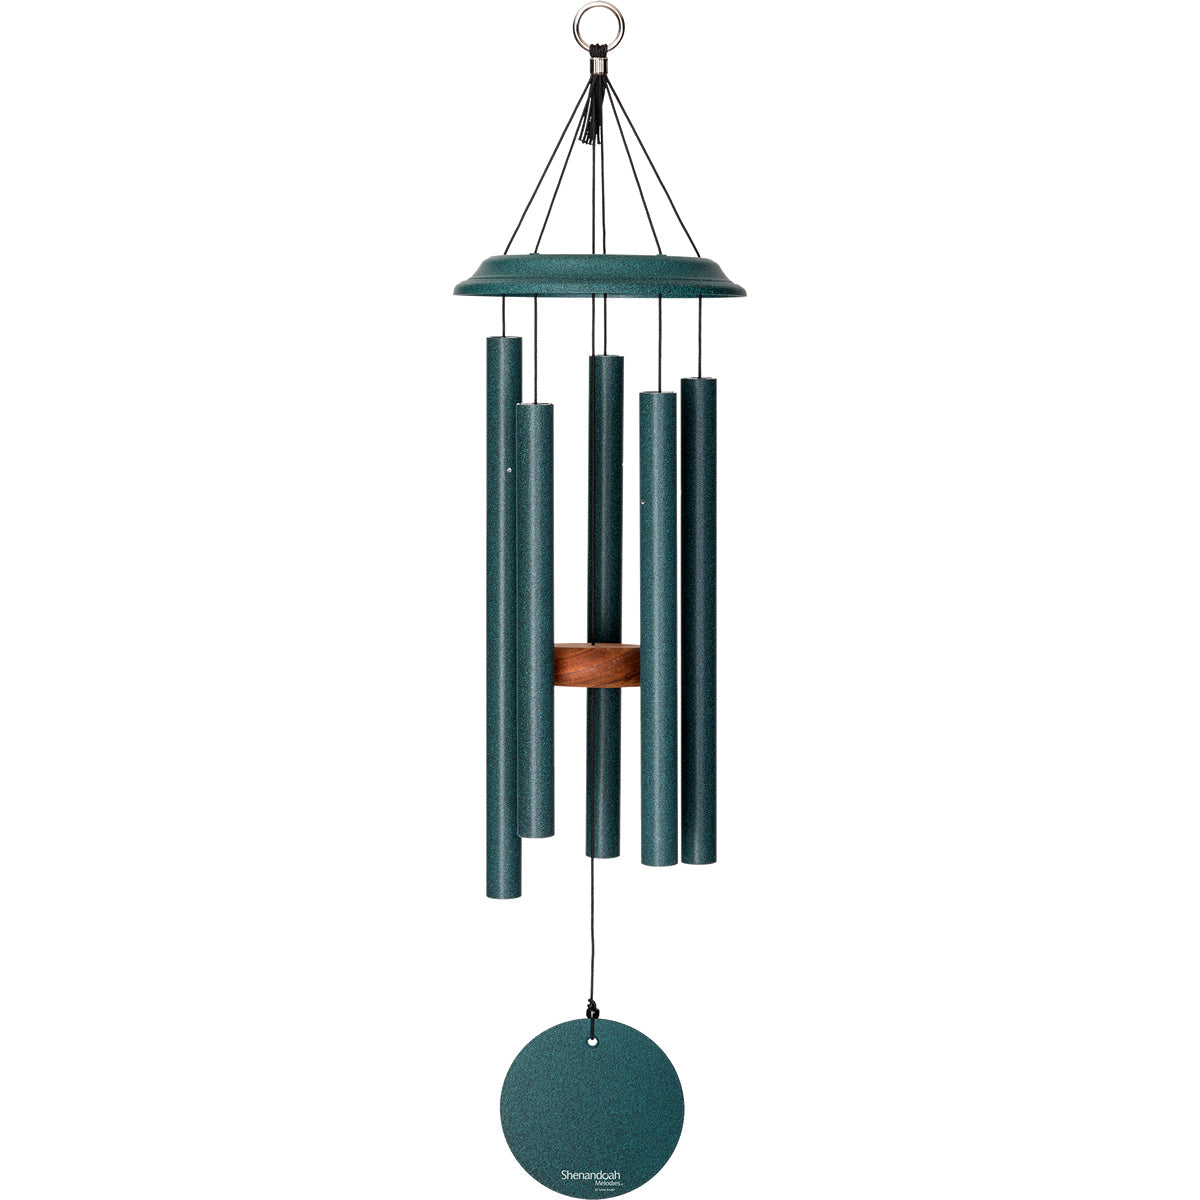 Shenandoah Melodies 29-inch Wind Chime - Green